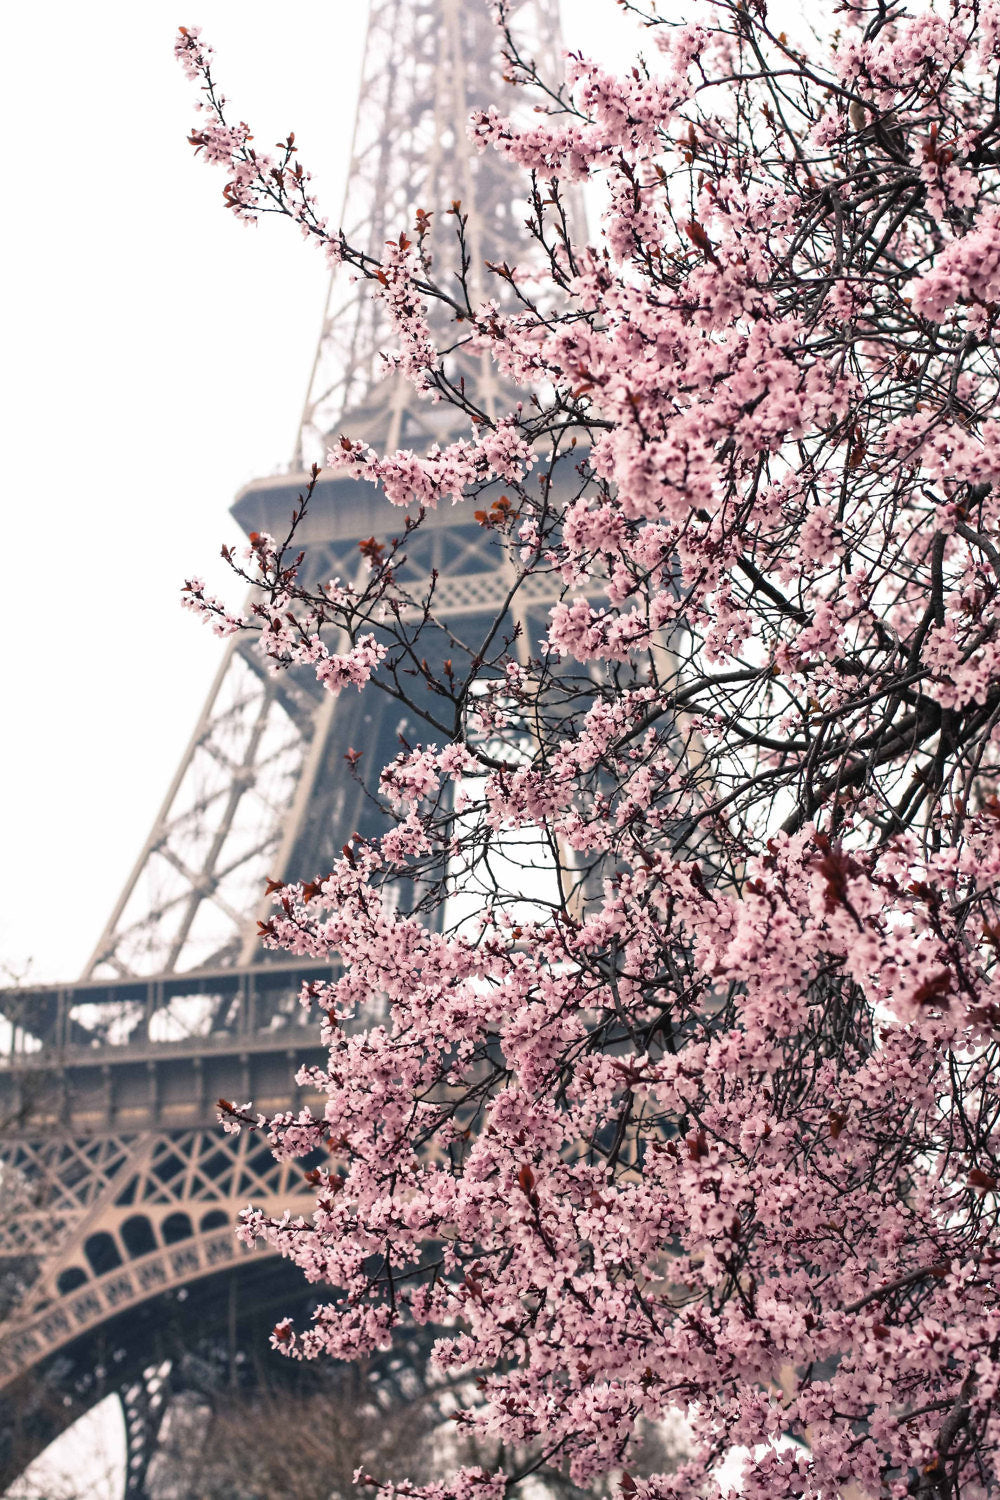 Pink Cherry Blossoms in front of the Eiffel Tower